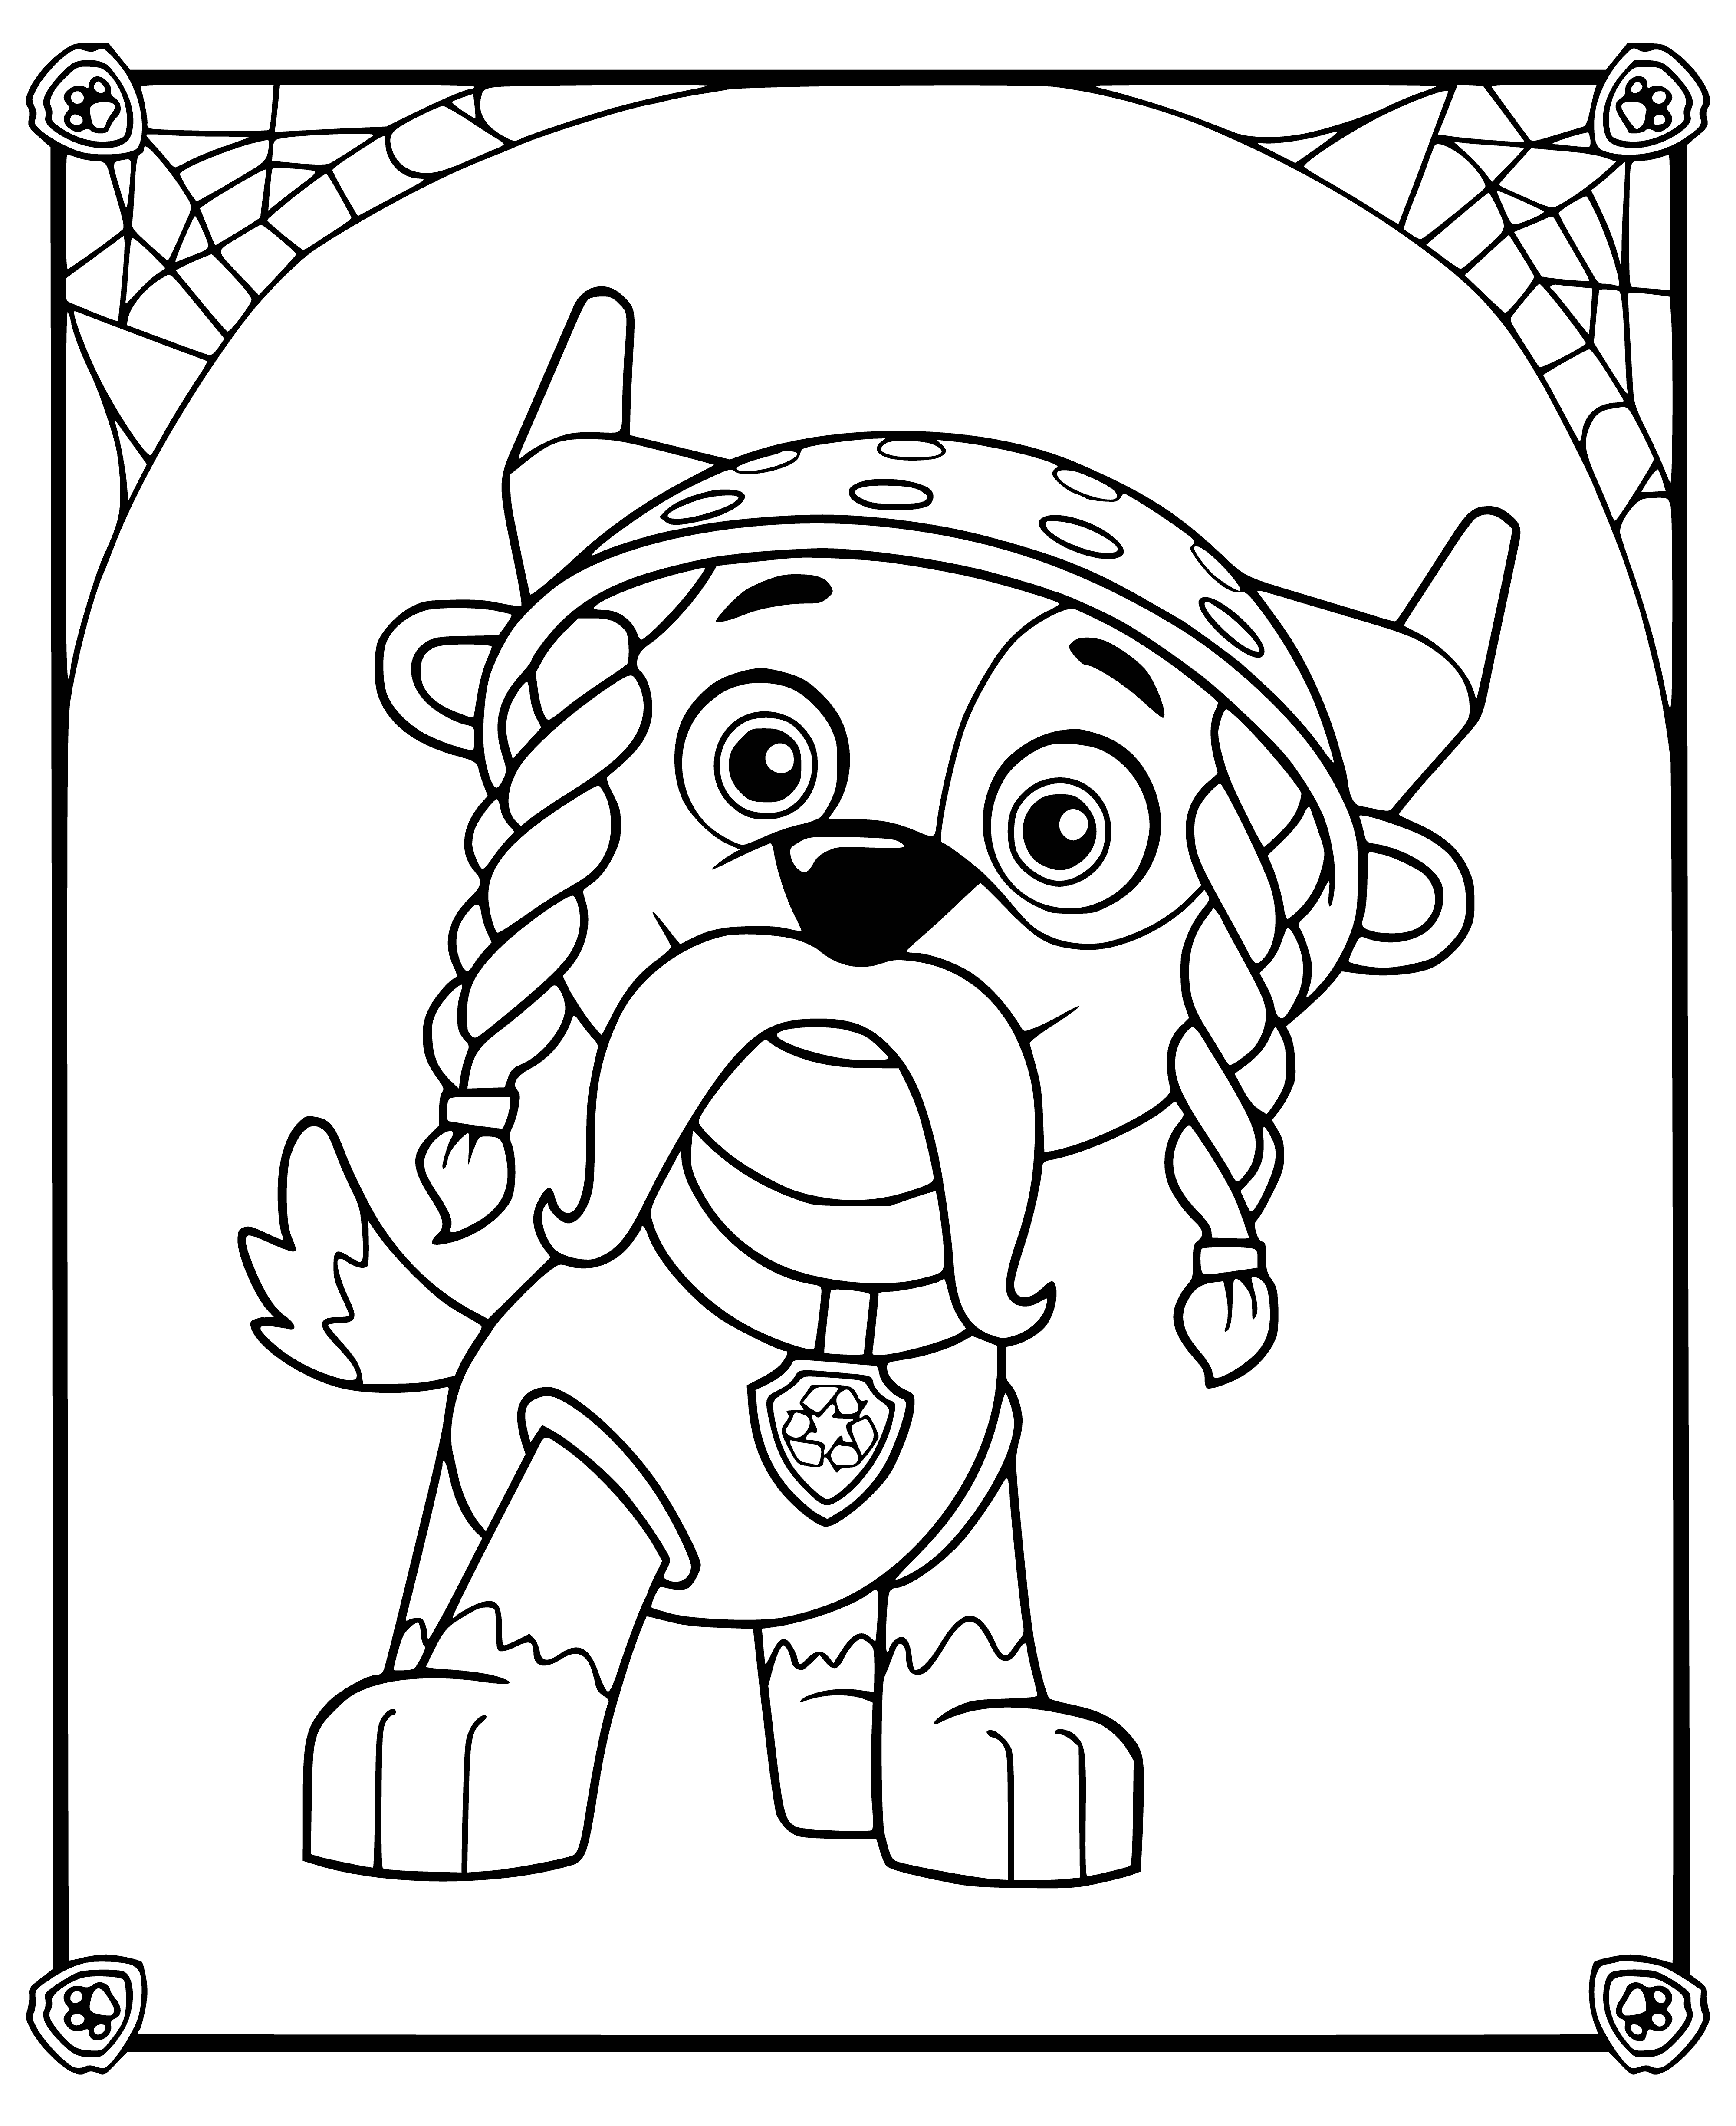 coloring page: Rocky is at carnival in blue cap, red shirt, holding red, white & blue lollipop, enjoying yellow & green striped ride.